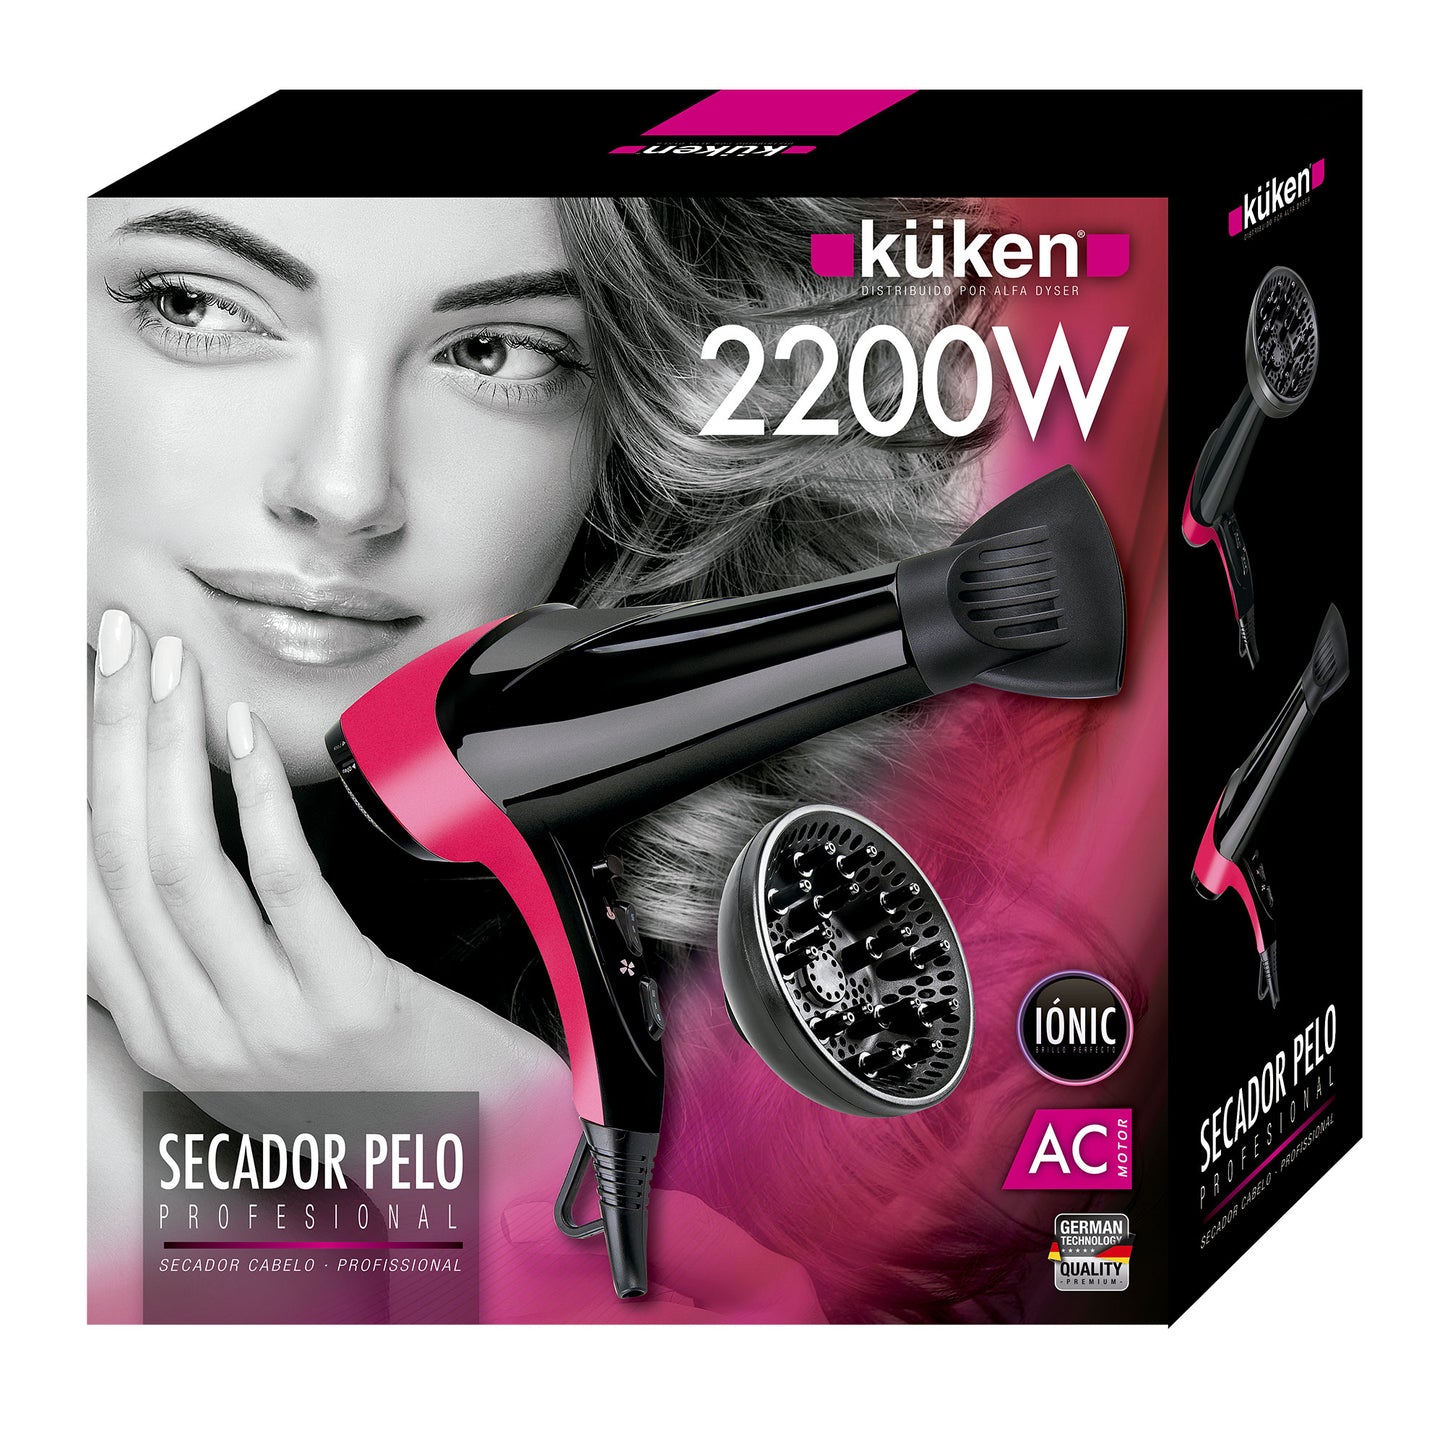 PROFESSIONAL HAIR DRYER IONIC BLACK AND MAGENTA 2200W 